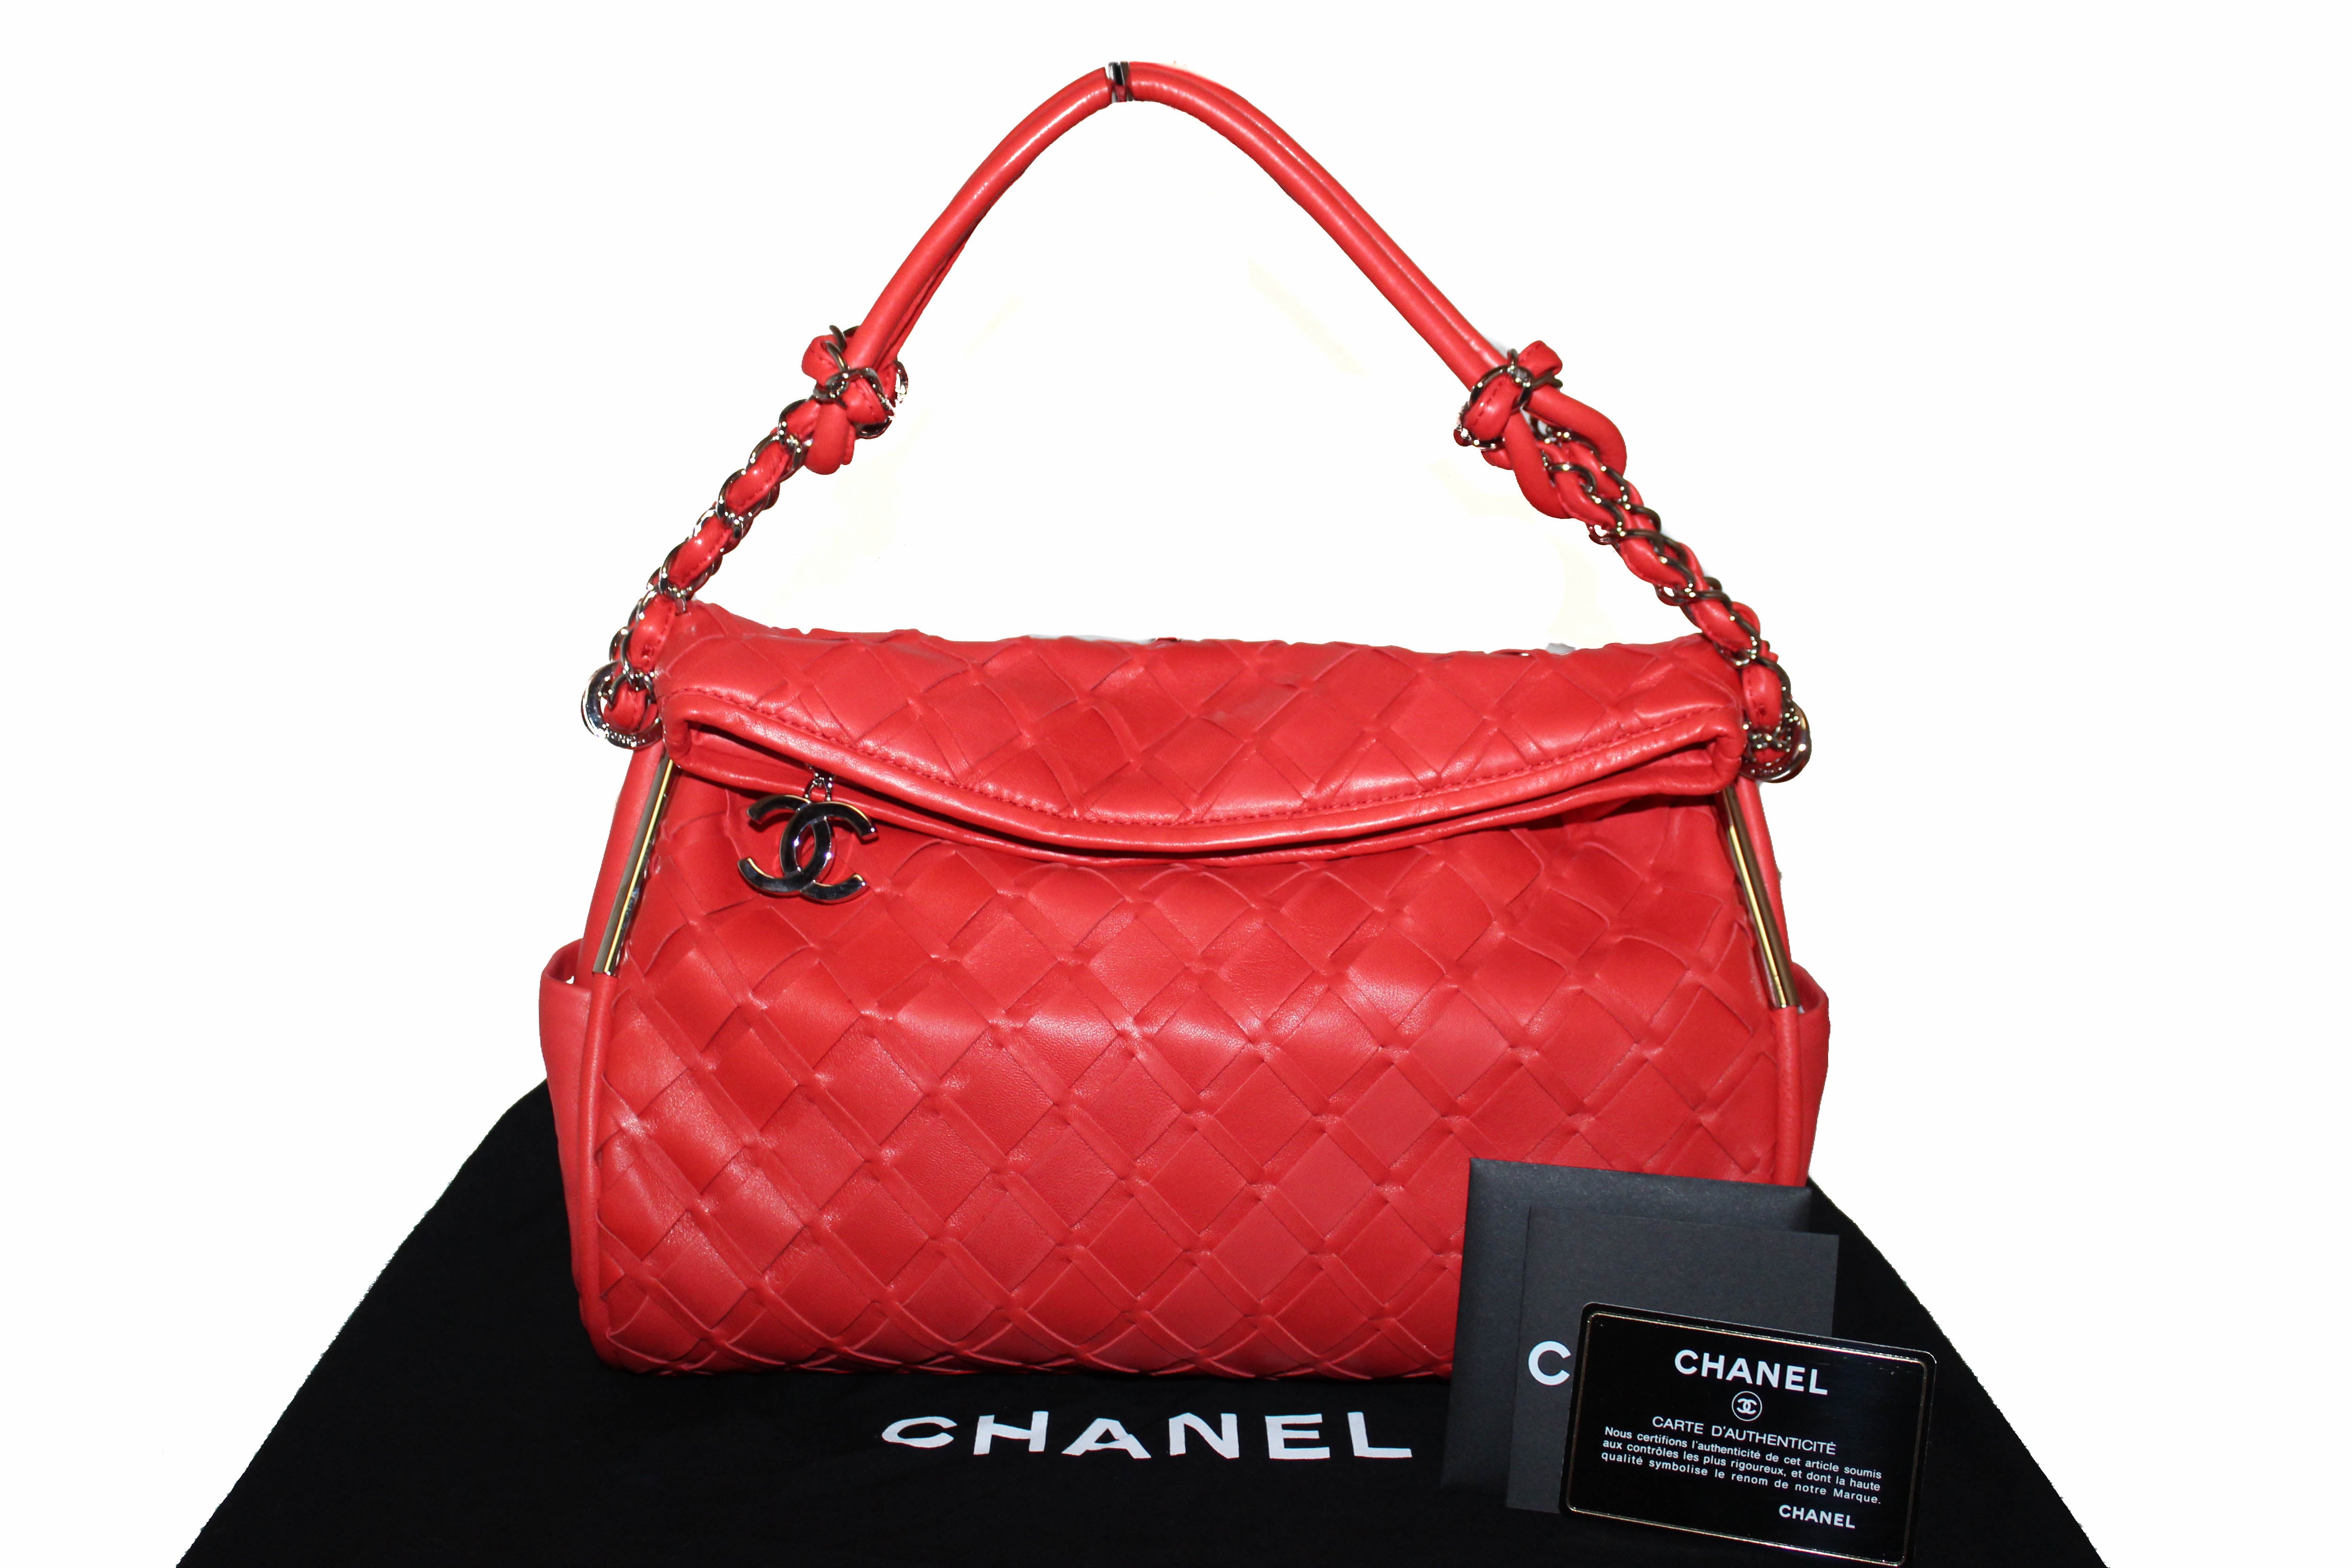 Authentic New Chanel Orange Red Lambskin Leather Woven Ultimate Soft Hobo Shoulder Bag